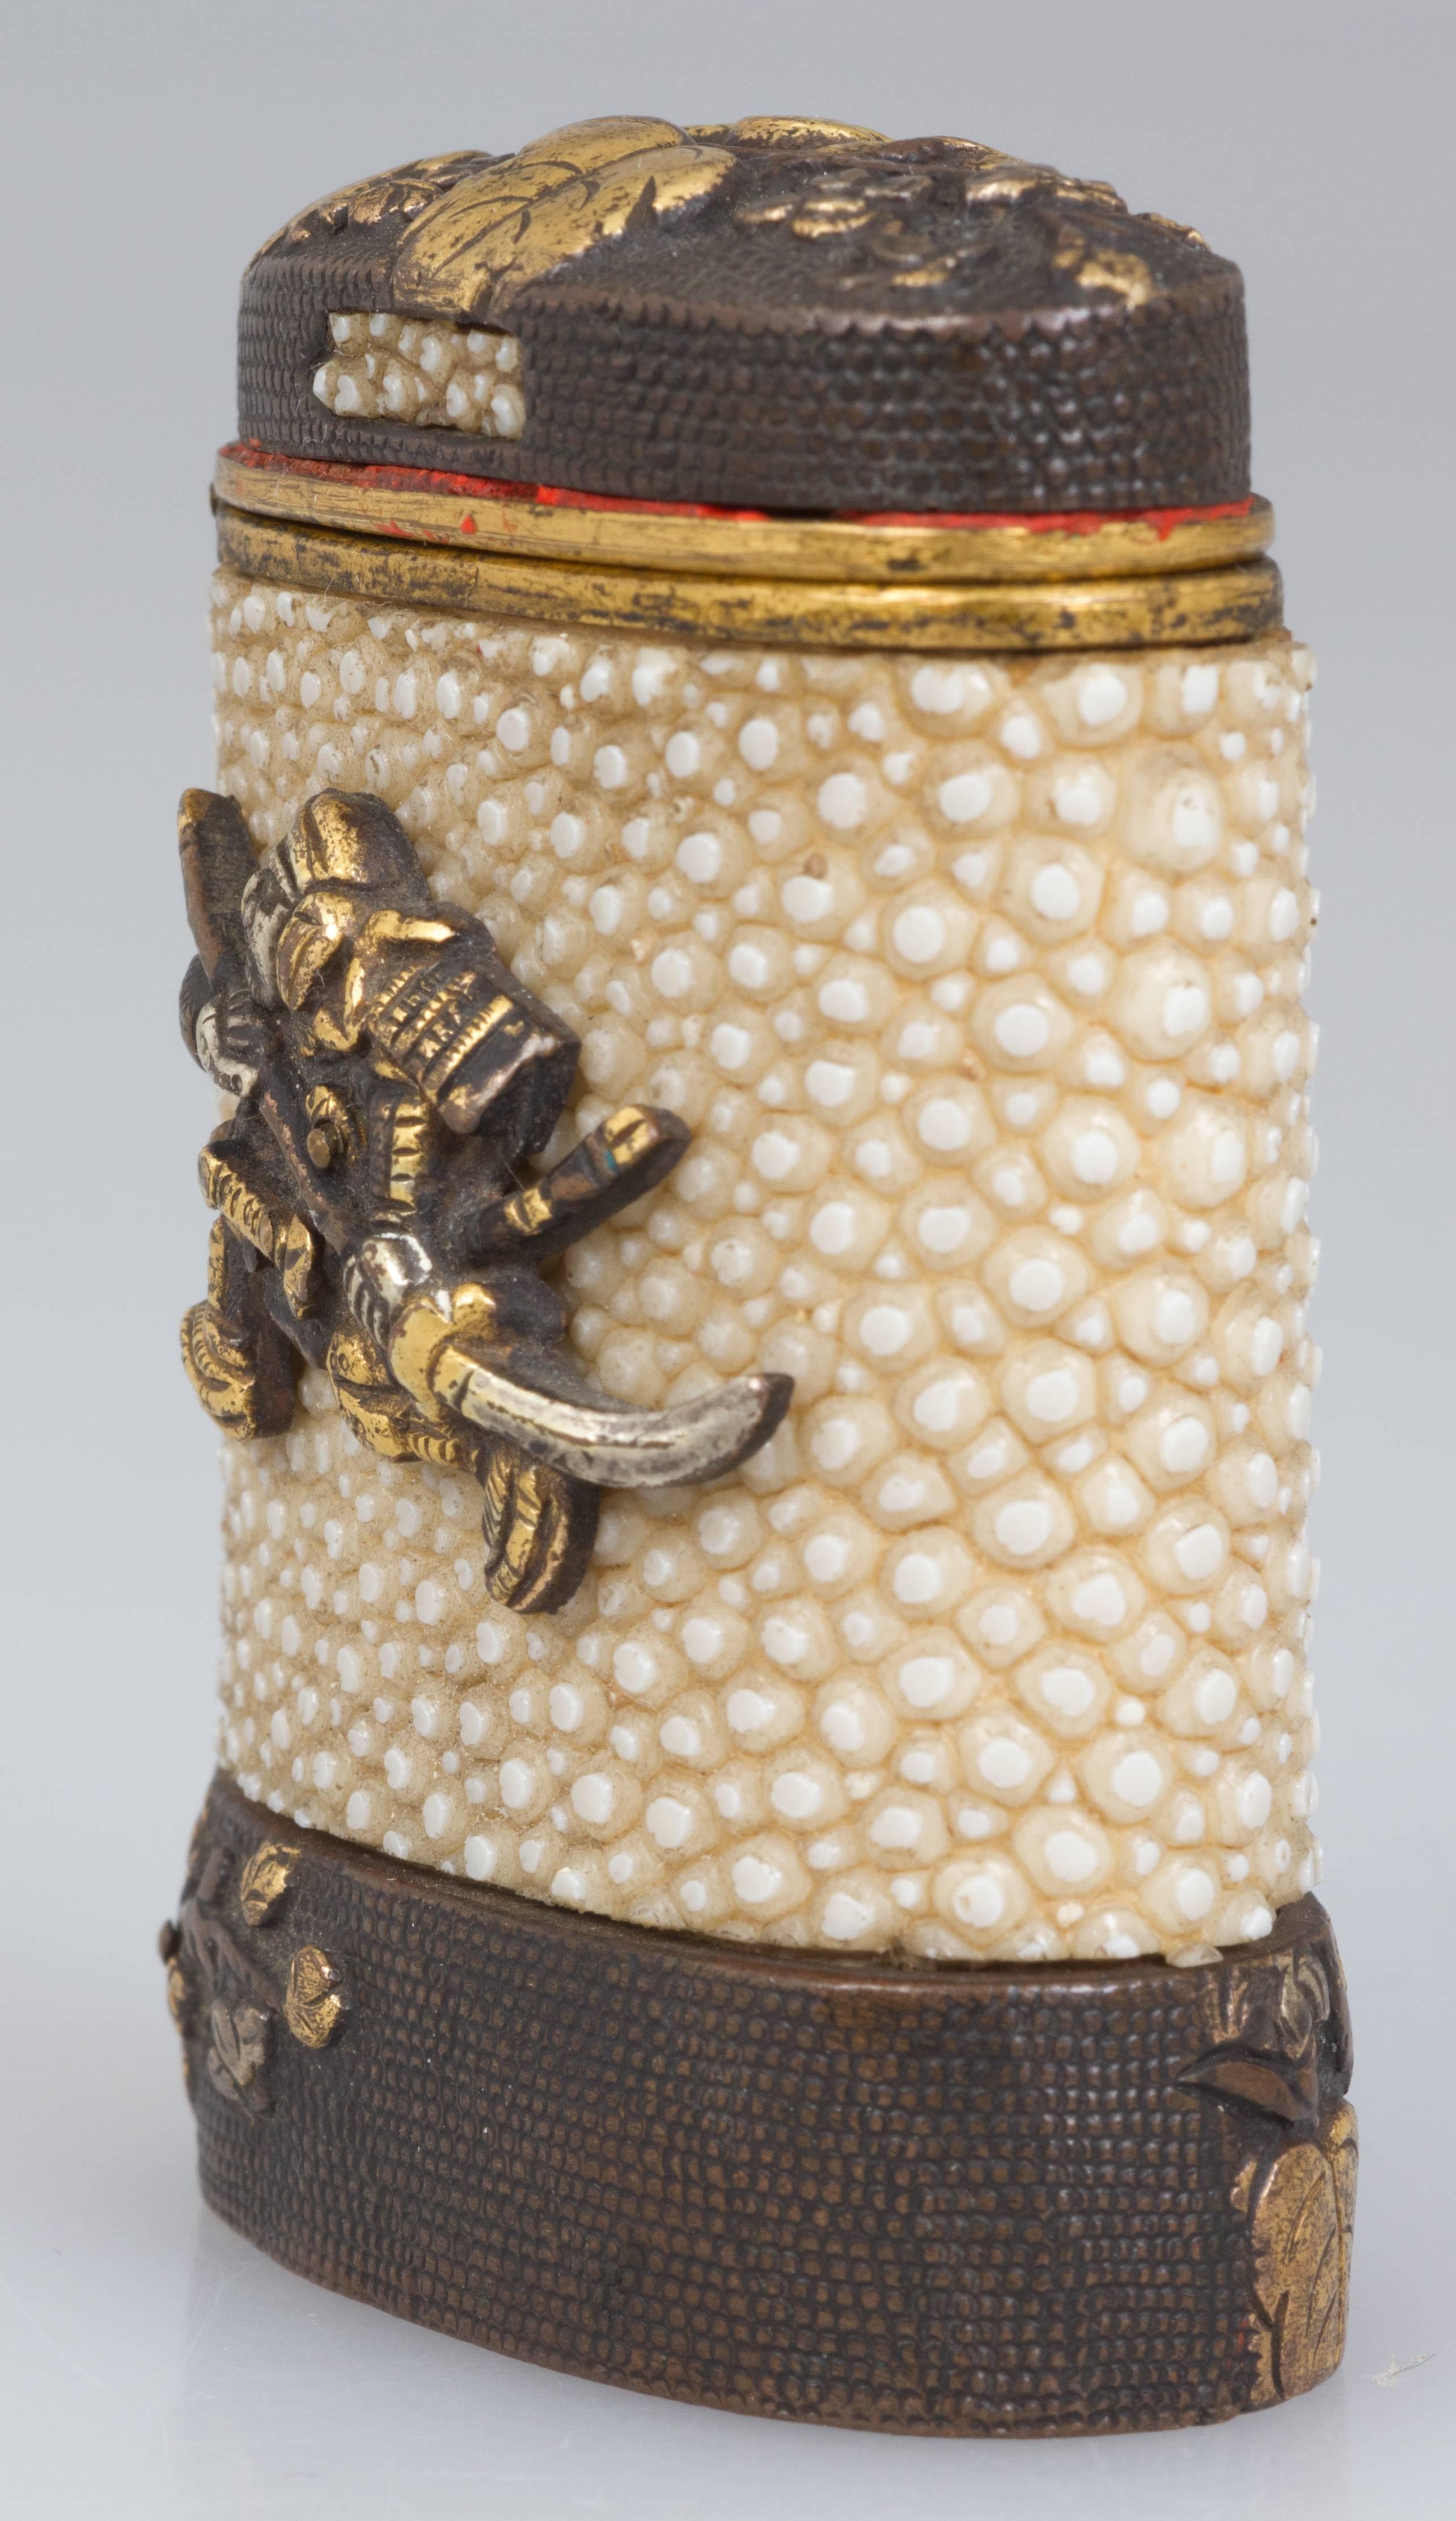 This is an unusual match safe, covered in shagreen with a samurai warrior applied to the body. Leaves and flowers decorate the hinged cover and bottom band. The striker is on the bottom.